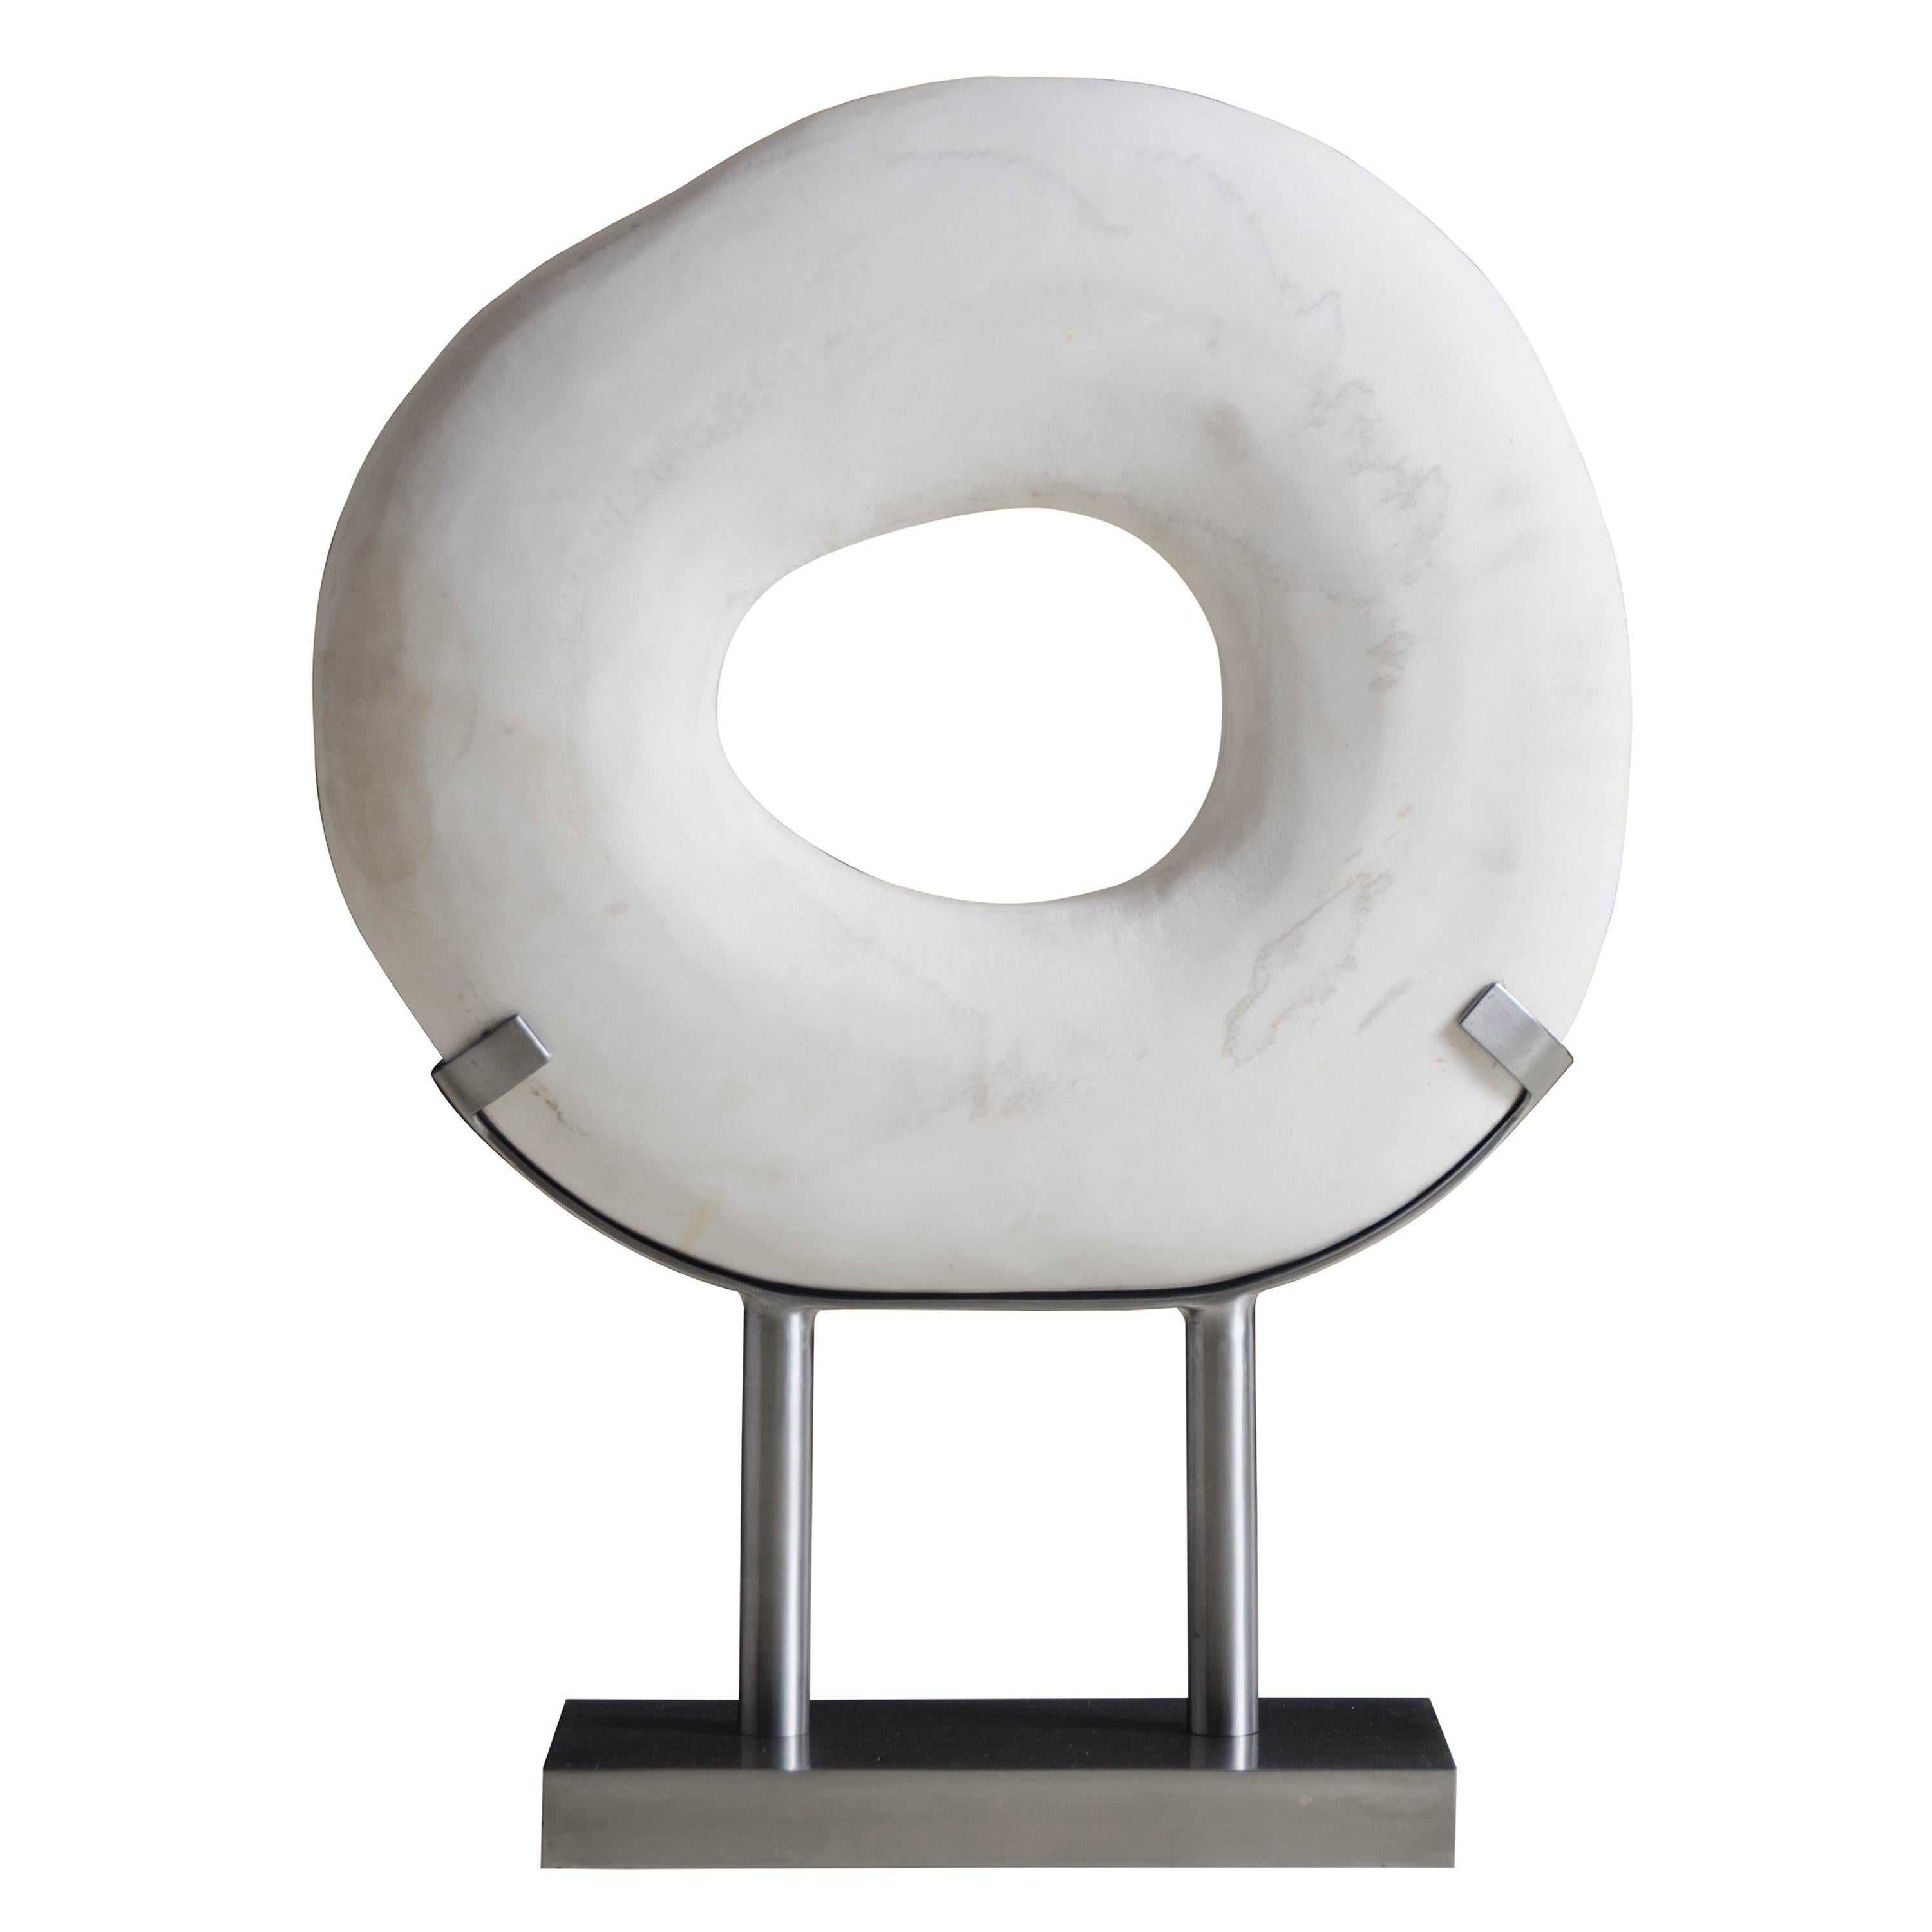 Zong Bi Sculpture in Han Bai Yu Stone on Steel Stand by Robert Kuo, Limited Ed For Sale